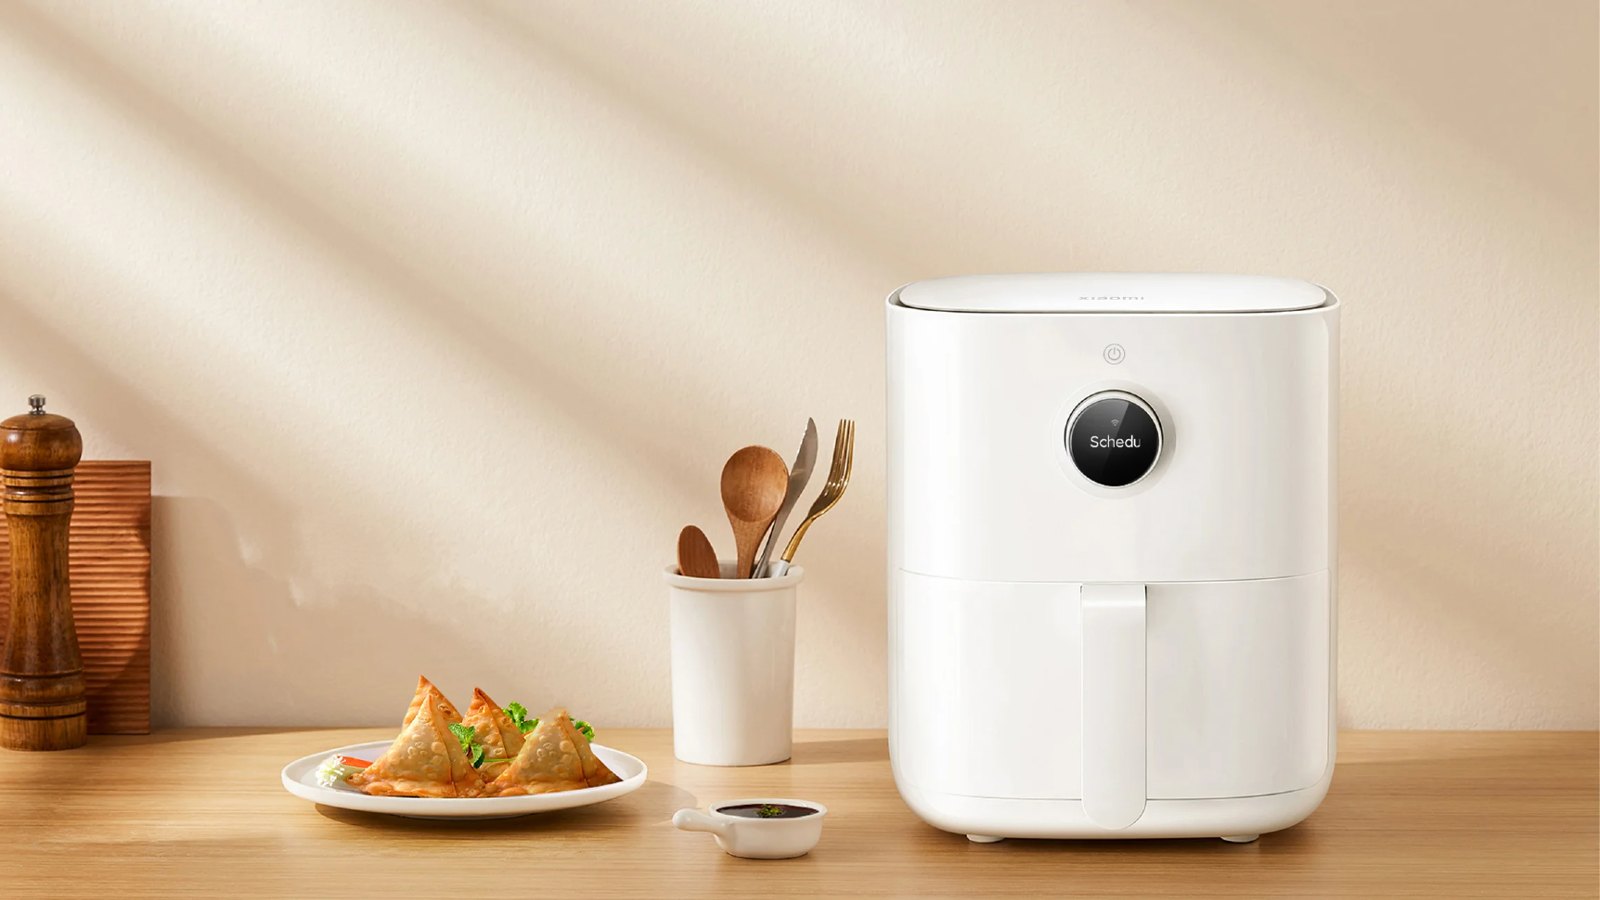 Xiaomi's new smart devices include an air fryer and an electric